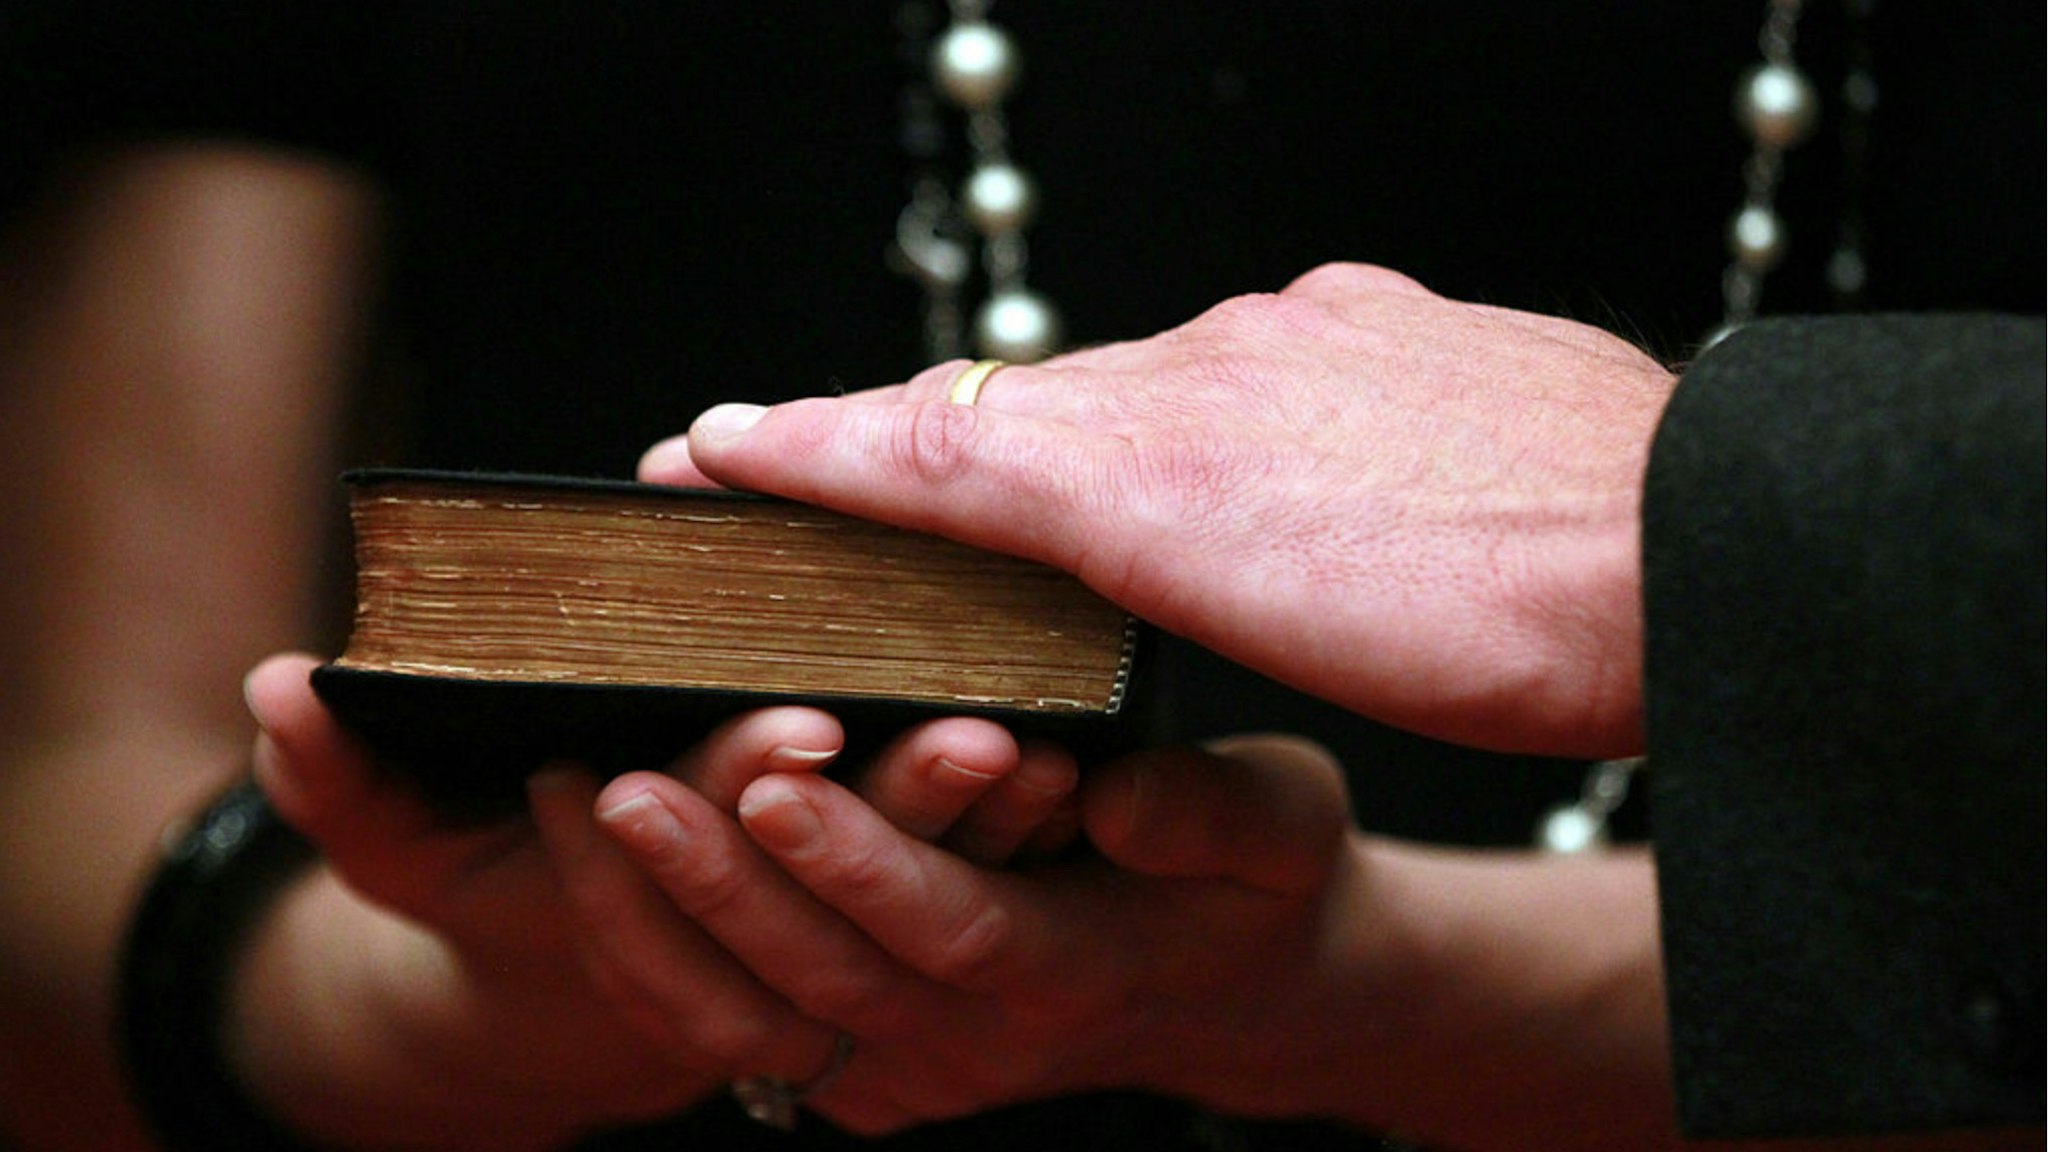 Gavin Newsom places his hand on a bible held by his wife Jennifer Siebel-Newsom as he is sworn in as the 49th Lt. Governor of California at the California State Capitol on January 10, 2011 in Sacramento, California.